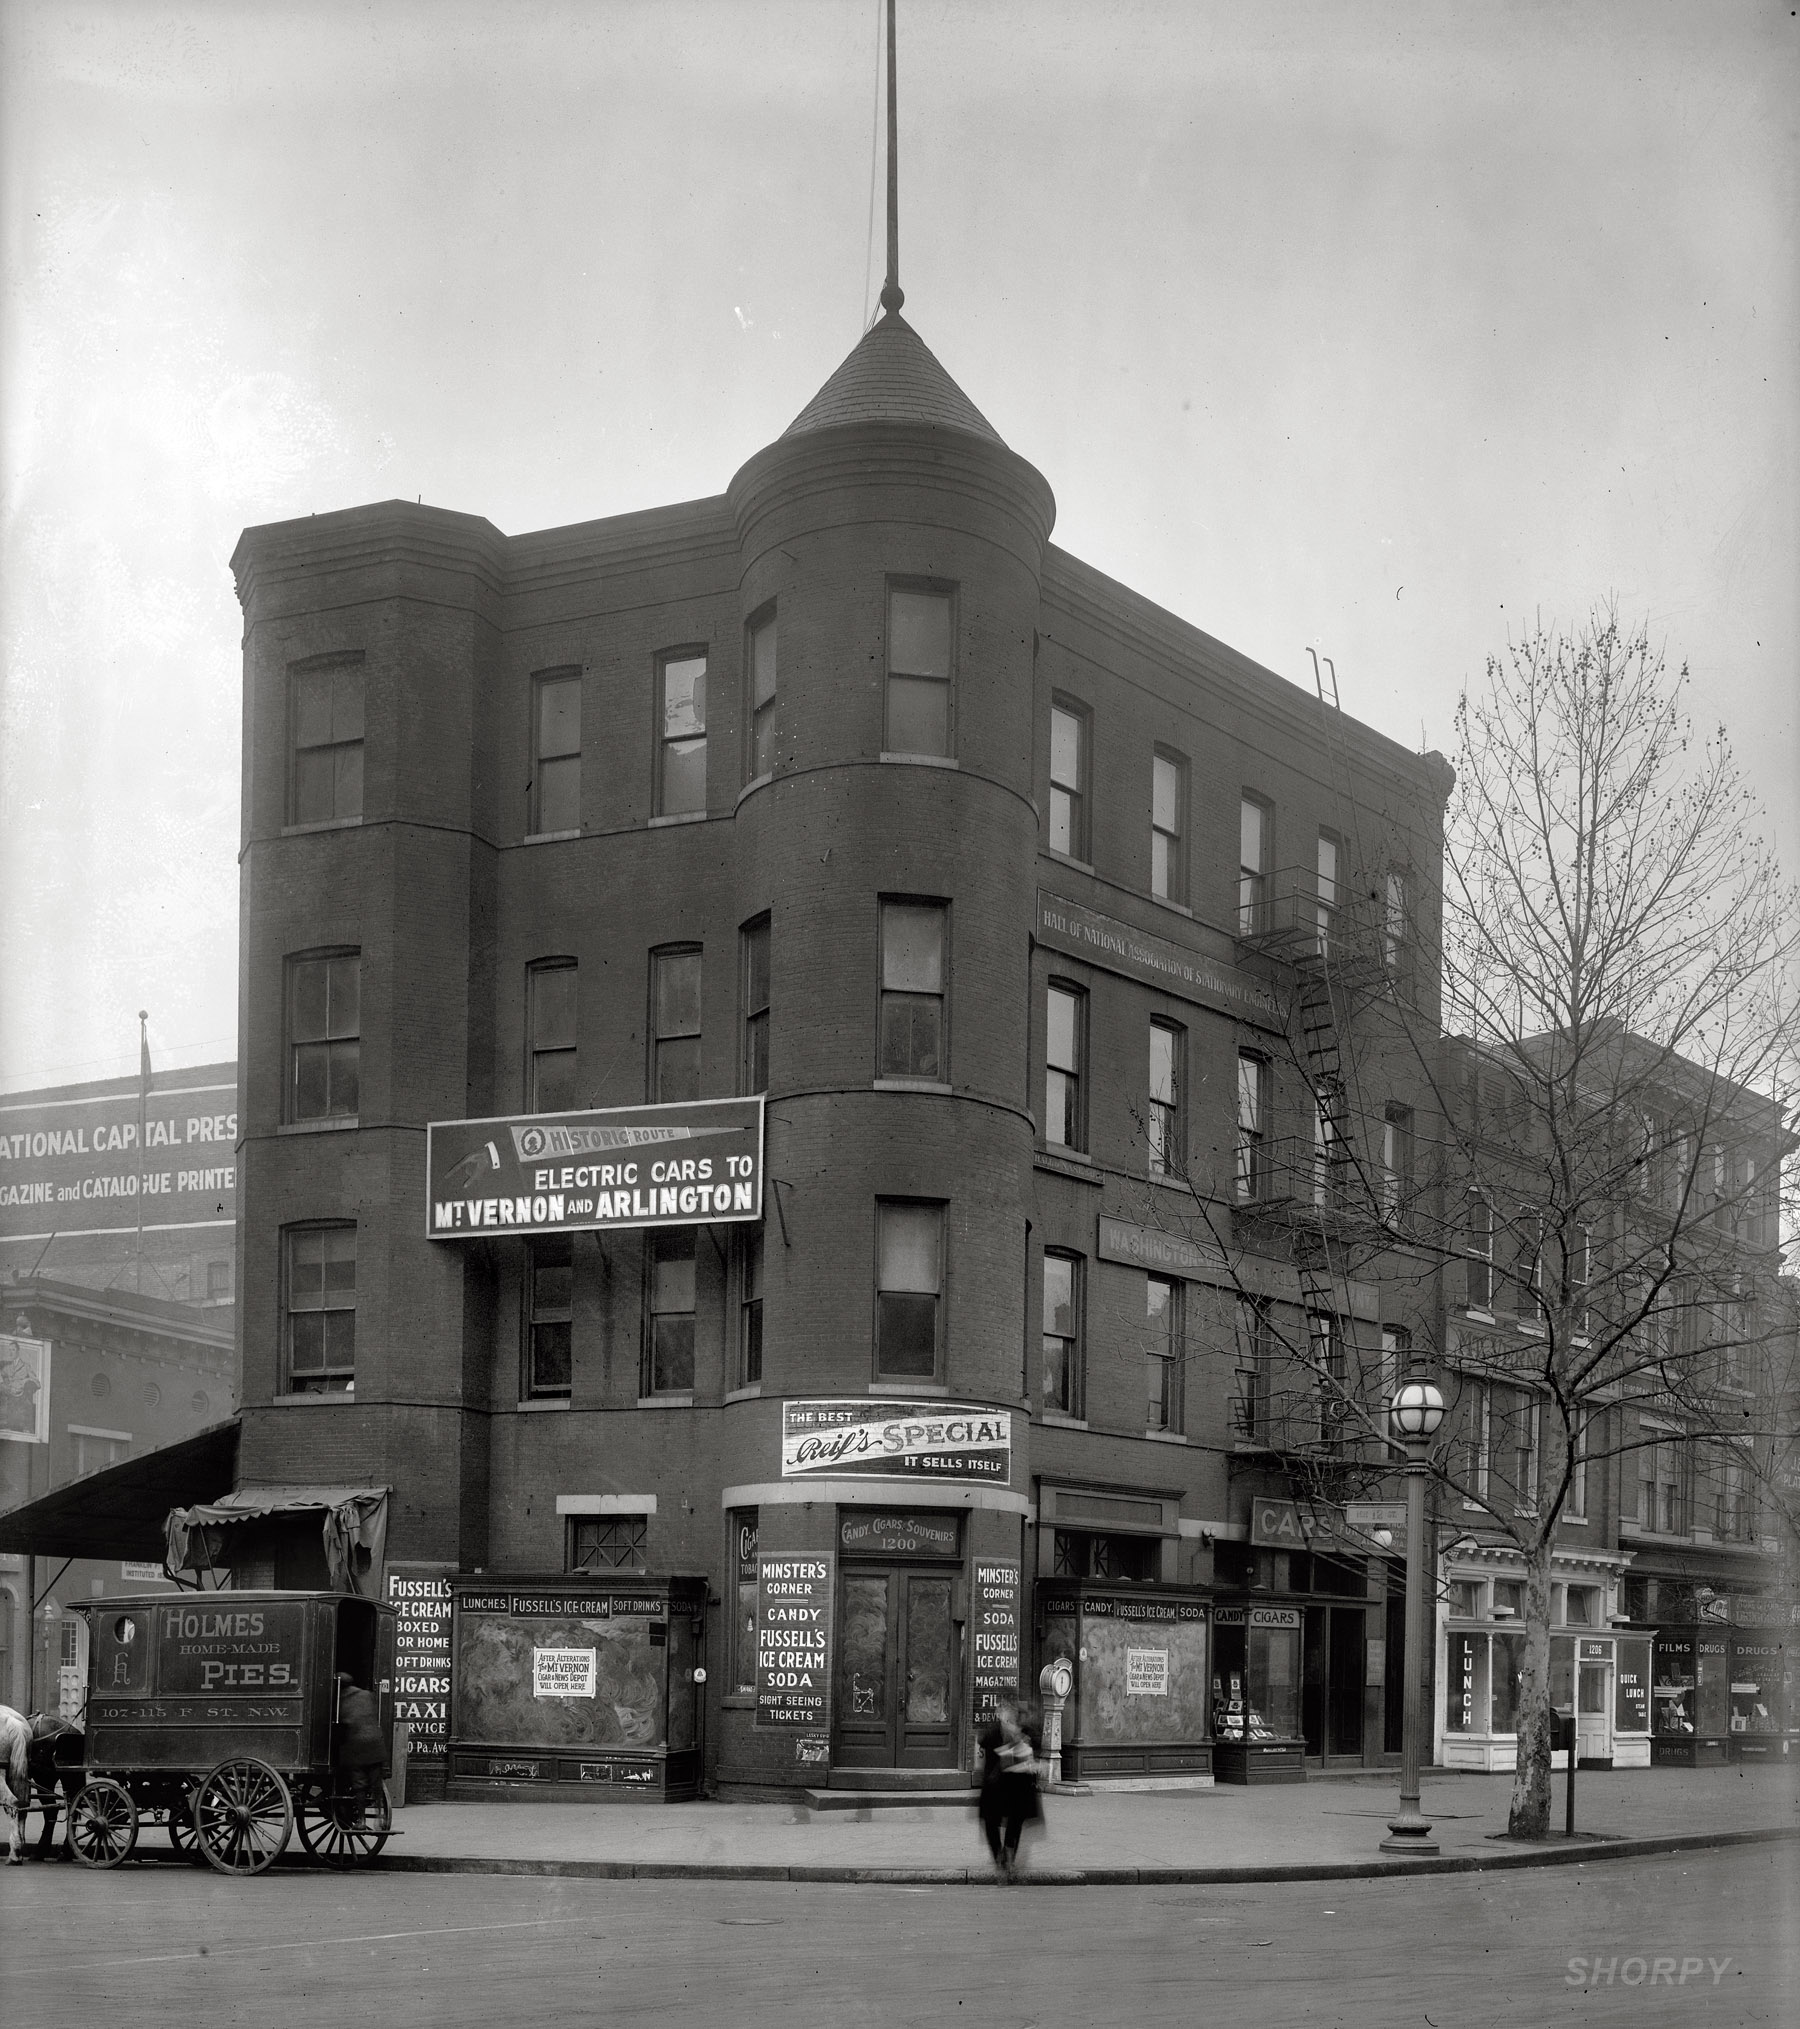 "Standard Engraving Co., Minster Building, 12th Street N.W." circa 1920. National Photo Company Collection glass negative. View full size.